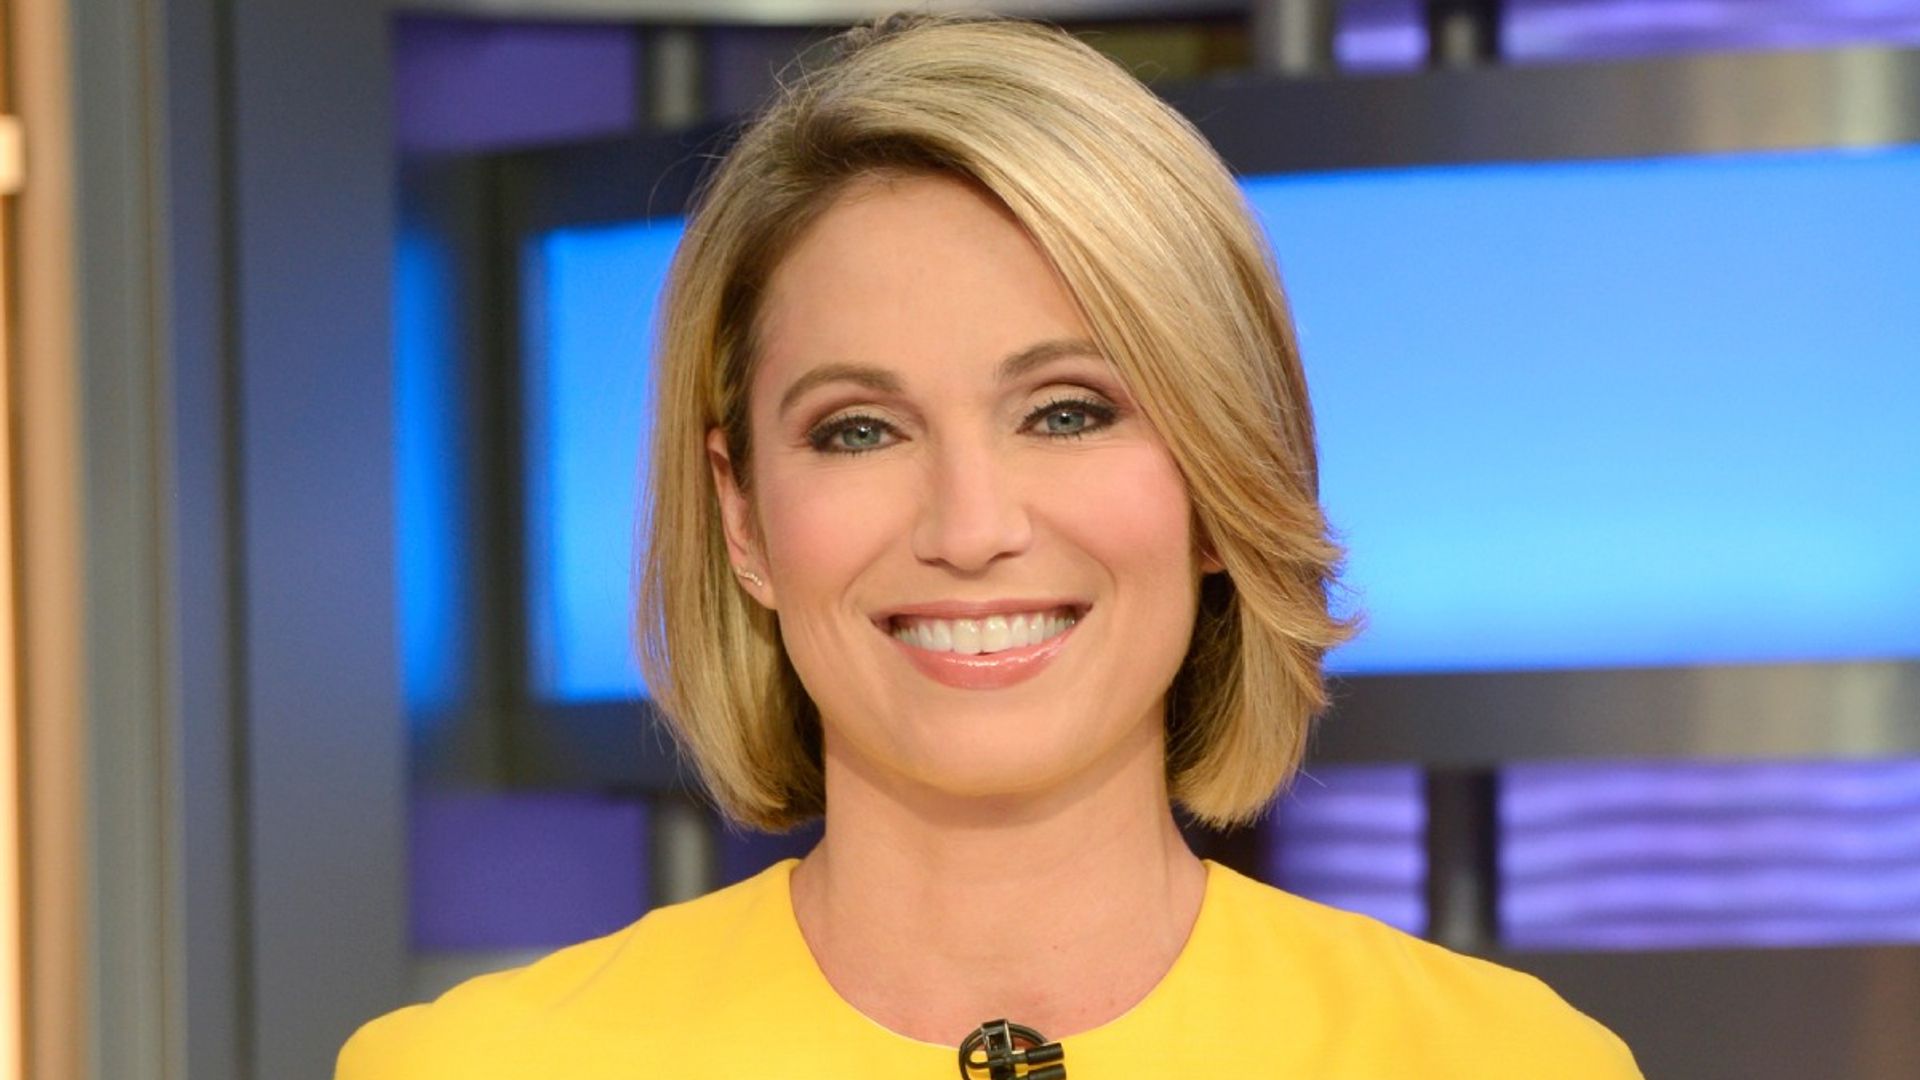 Good Morning America's Amy Robach wows fans with new 'spring' look